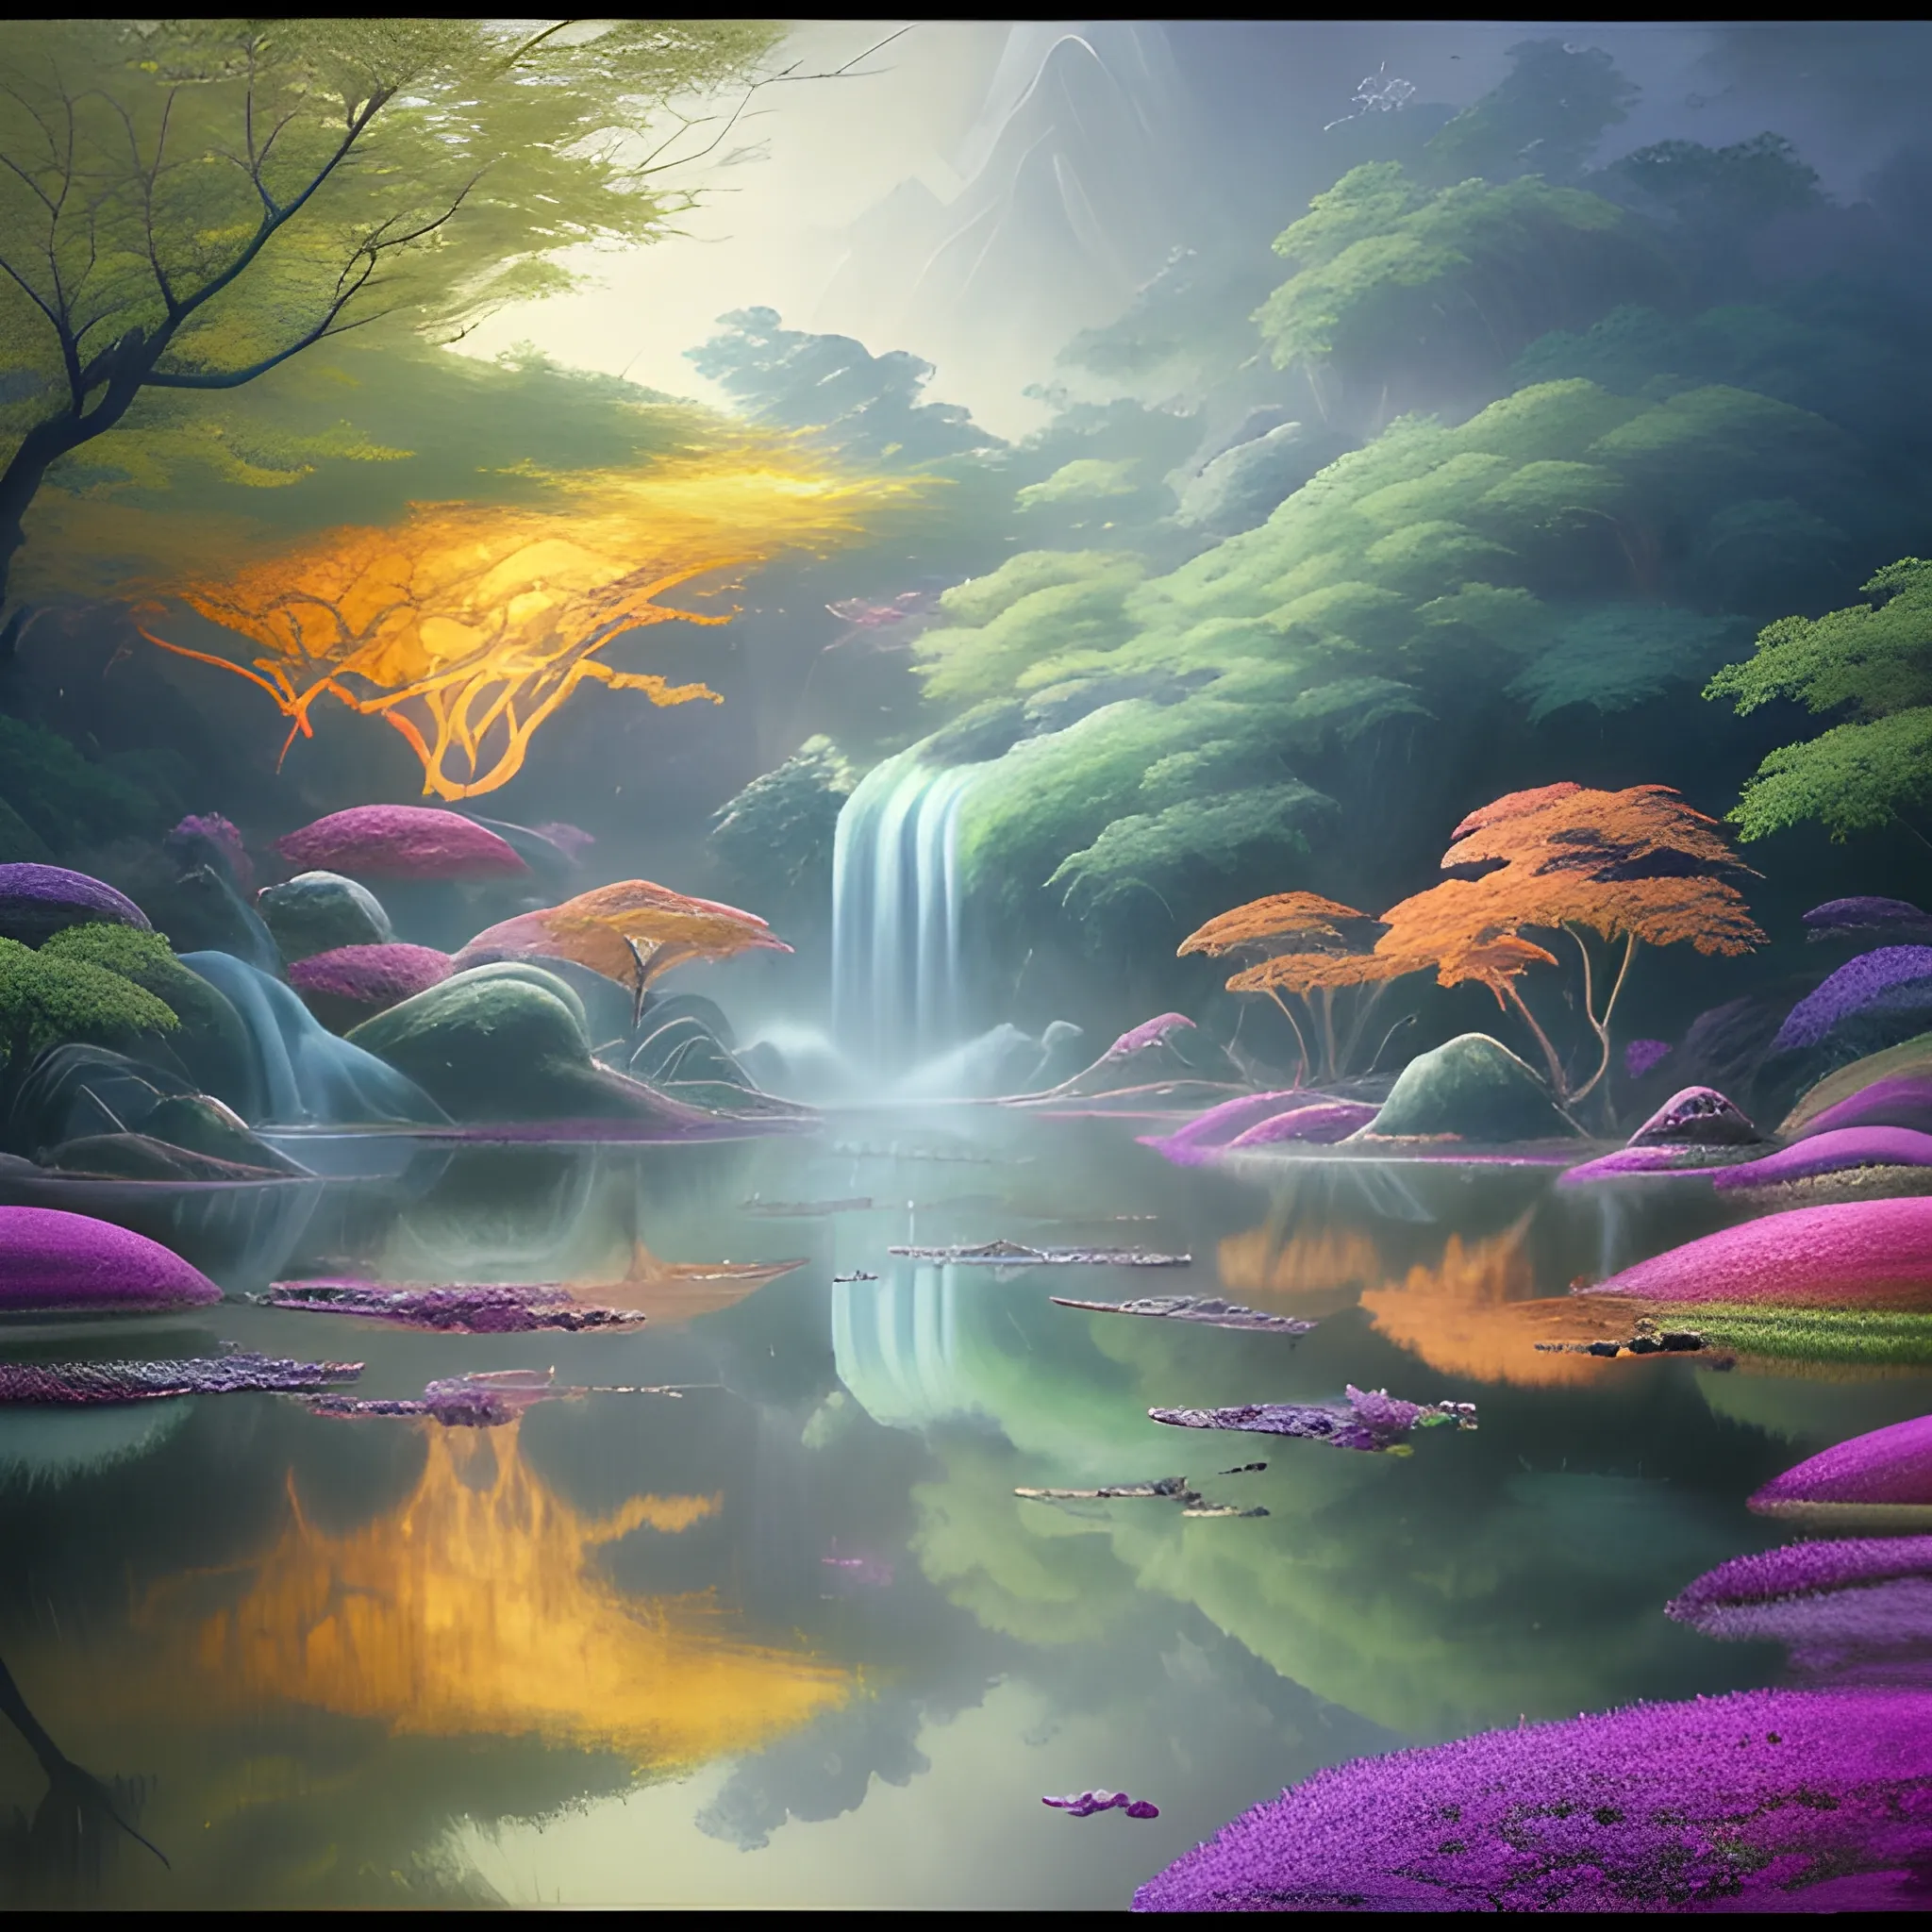 (by Ananta Mandal (and Andrew Biraj:0.5)), (in the style of nihonga), Style: Abstract, Medium: Digital illustration, Subject: An otherworldly landscape with floating islands, cascading waterfalls, and vibrant flora and fauna. Camera Angle: Overhead shot capturing the vastness and intricate details of the scene. The colors are saturated, and the lighting creates a warm and ethereal atmosphere. The painting is highly detailed, with every brushstroke capturing the complexity of the imaginary world., (high quality), (detailed), (masterpiece), (best quality), (highres), (extremely detailed), (8k), Oil Painting, Oil Painting